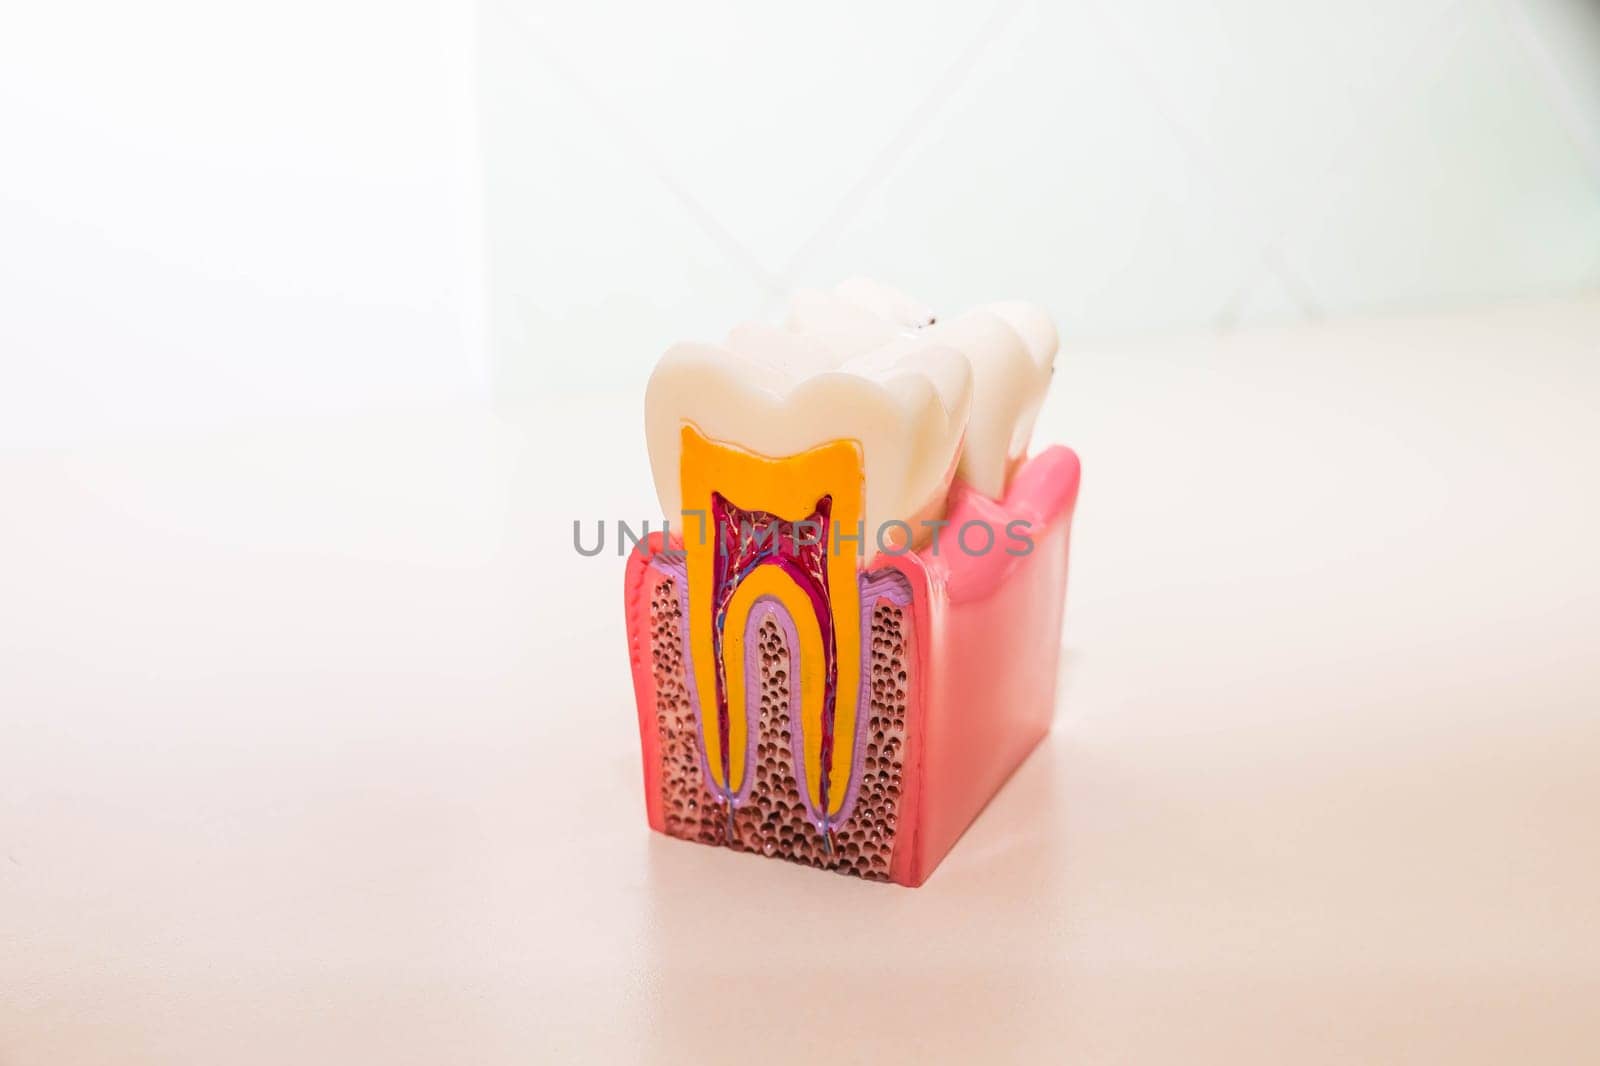 tooth model without caries, tooth decay in dentist's office. Healthy teeth concept .